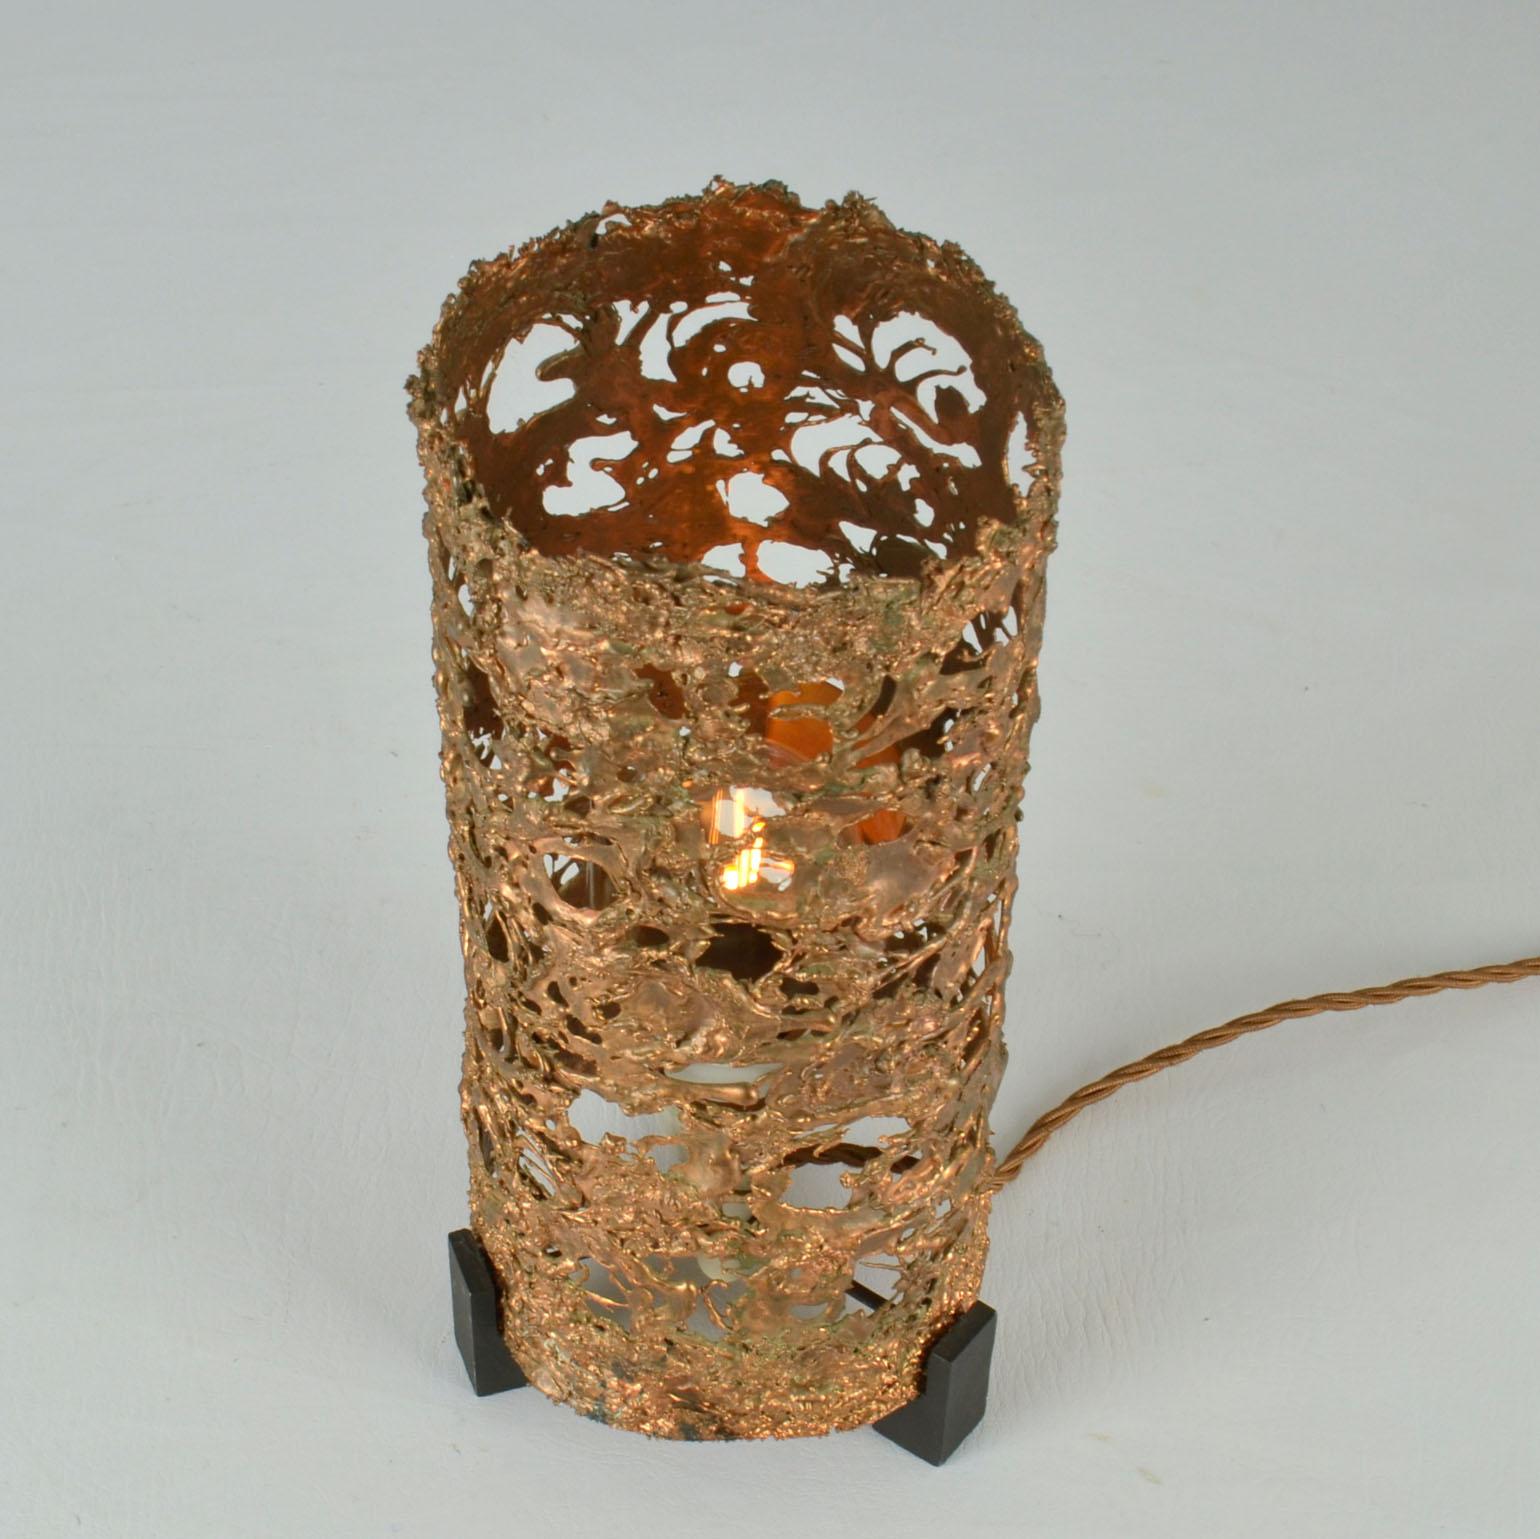 Organic Relief Copper Table Lamp by Aimo Tukiainen Finland, 1960's For Sale 1